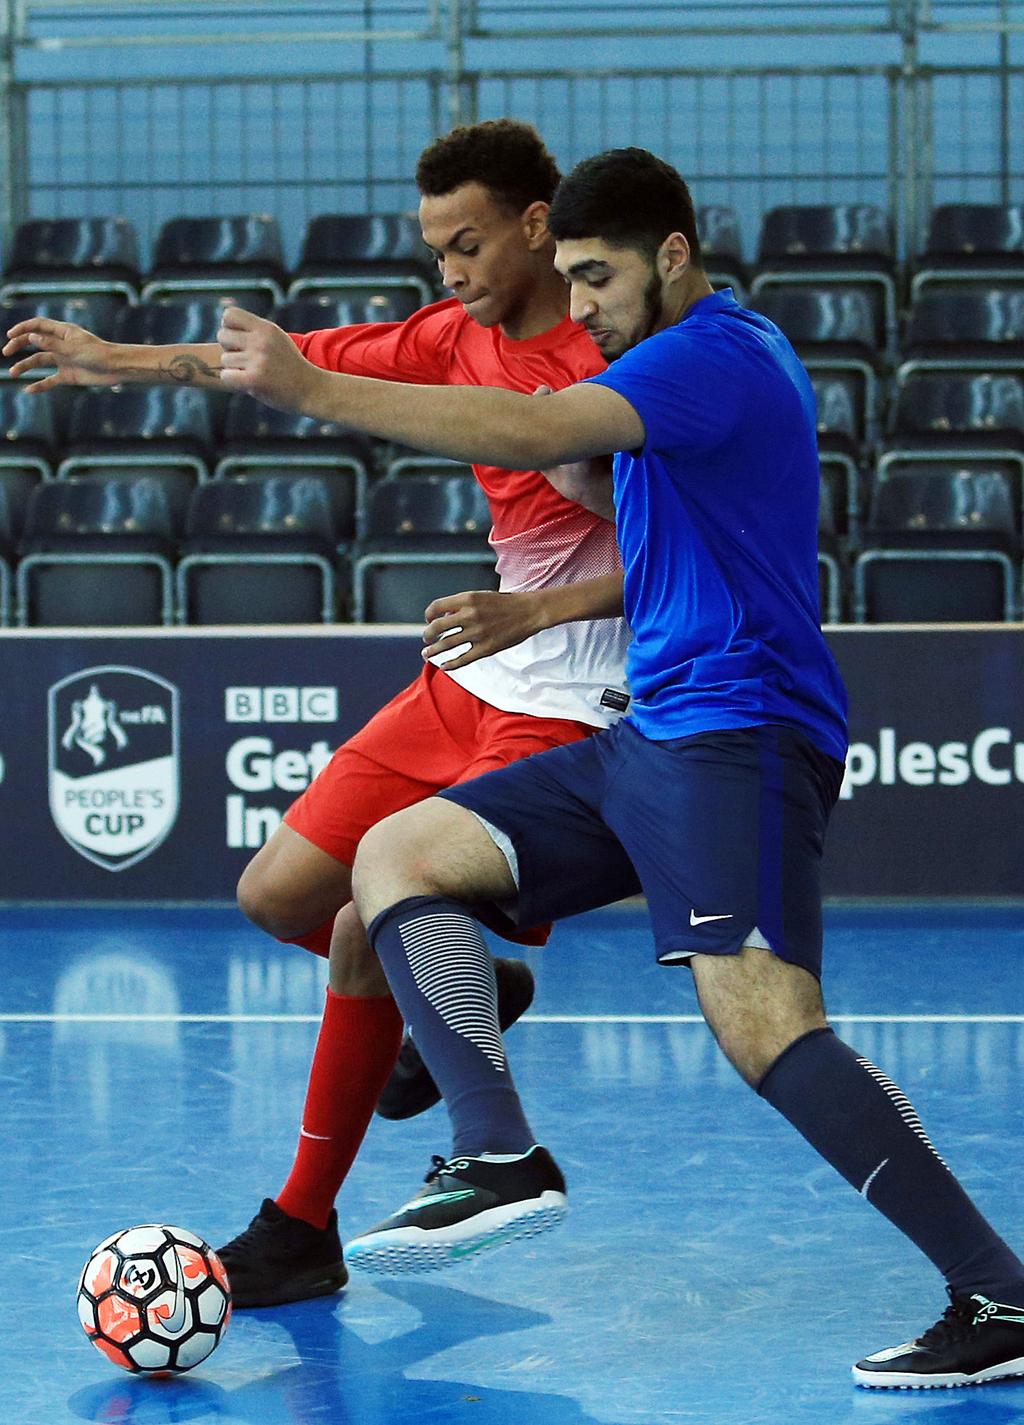 Arranging friendly matches, mini-tournaments or festivals where Futsal is played is a relatively simple way of gradually introducing Futsal to young players, as well as helping all